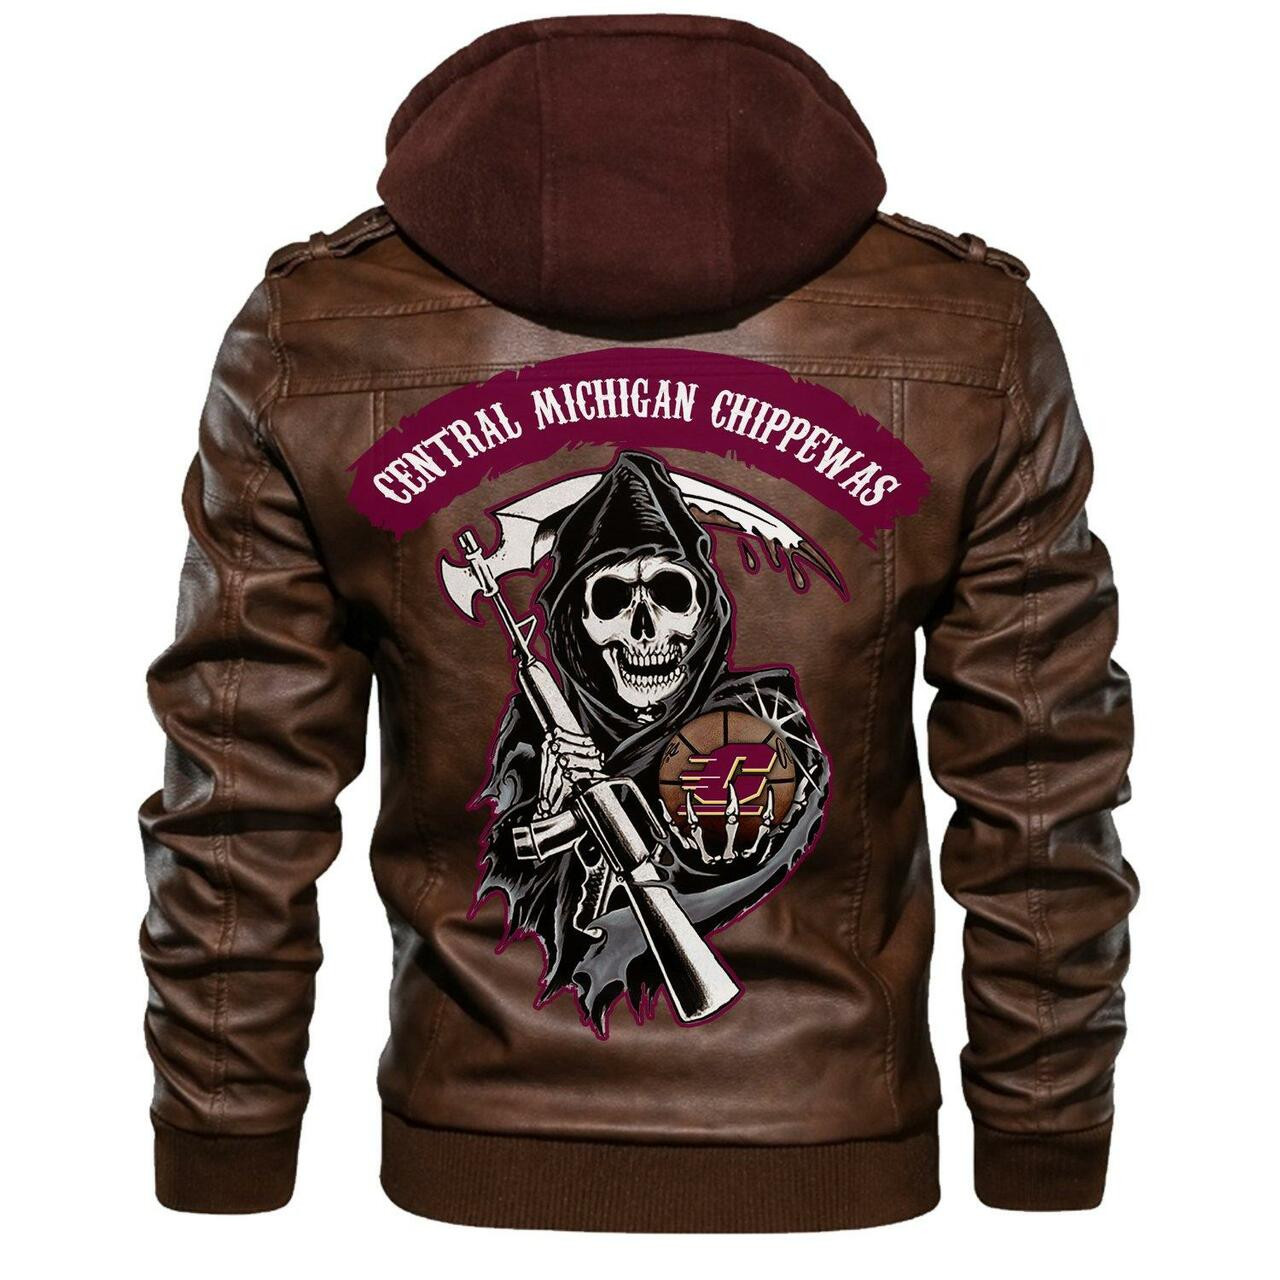 Our store has all of the latest leather jacket 92